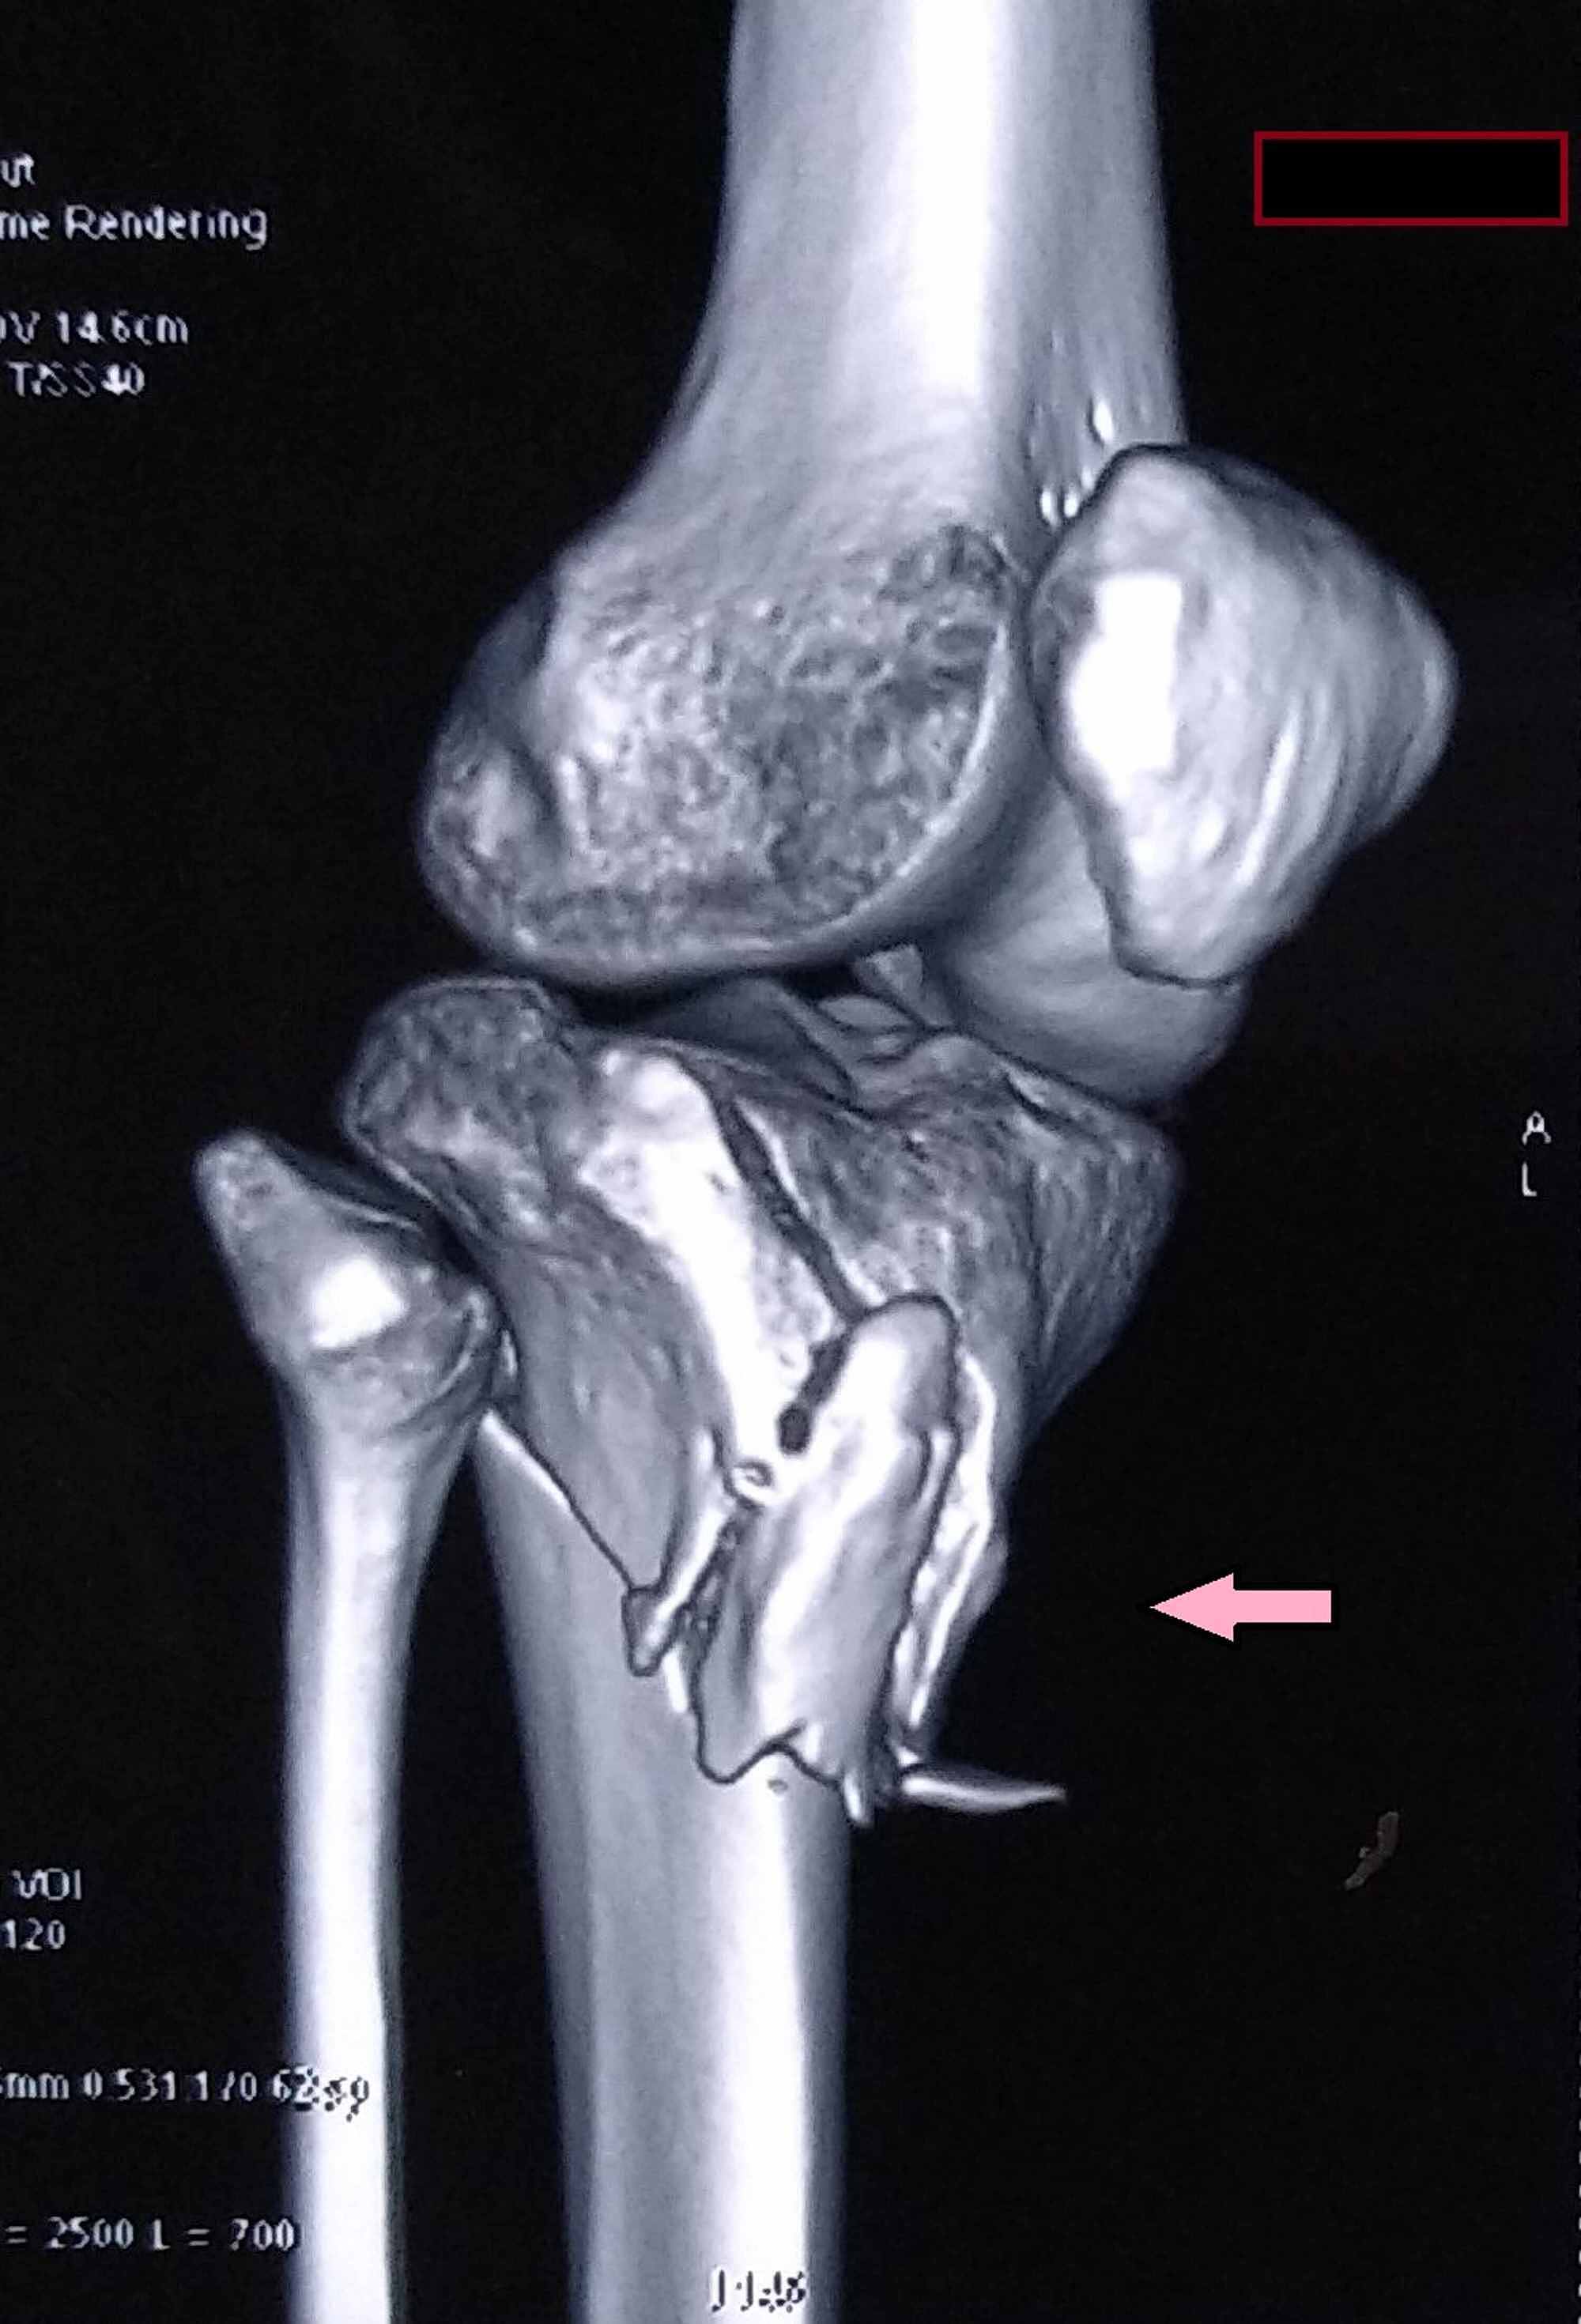 tibia fracture